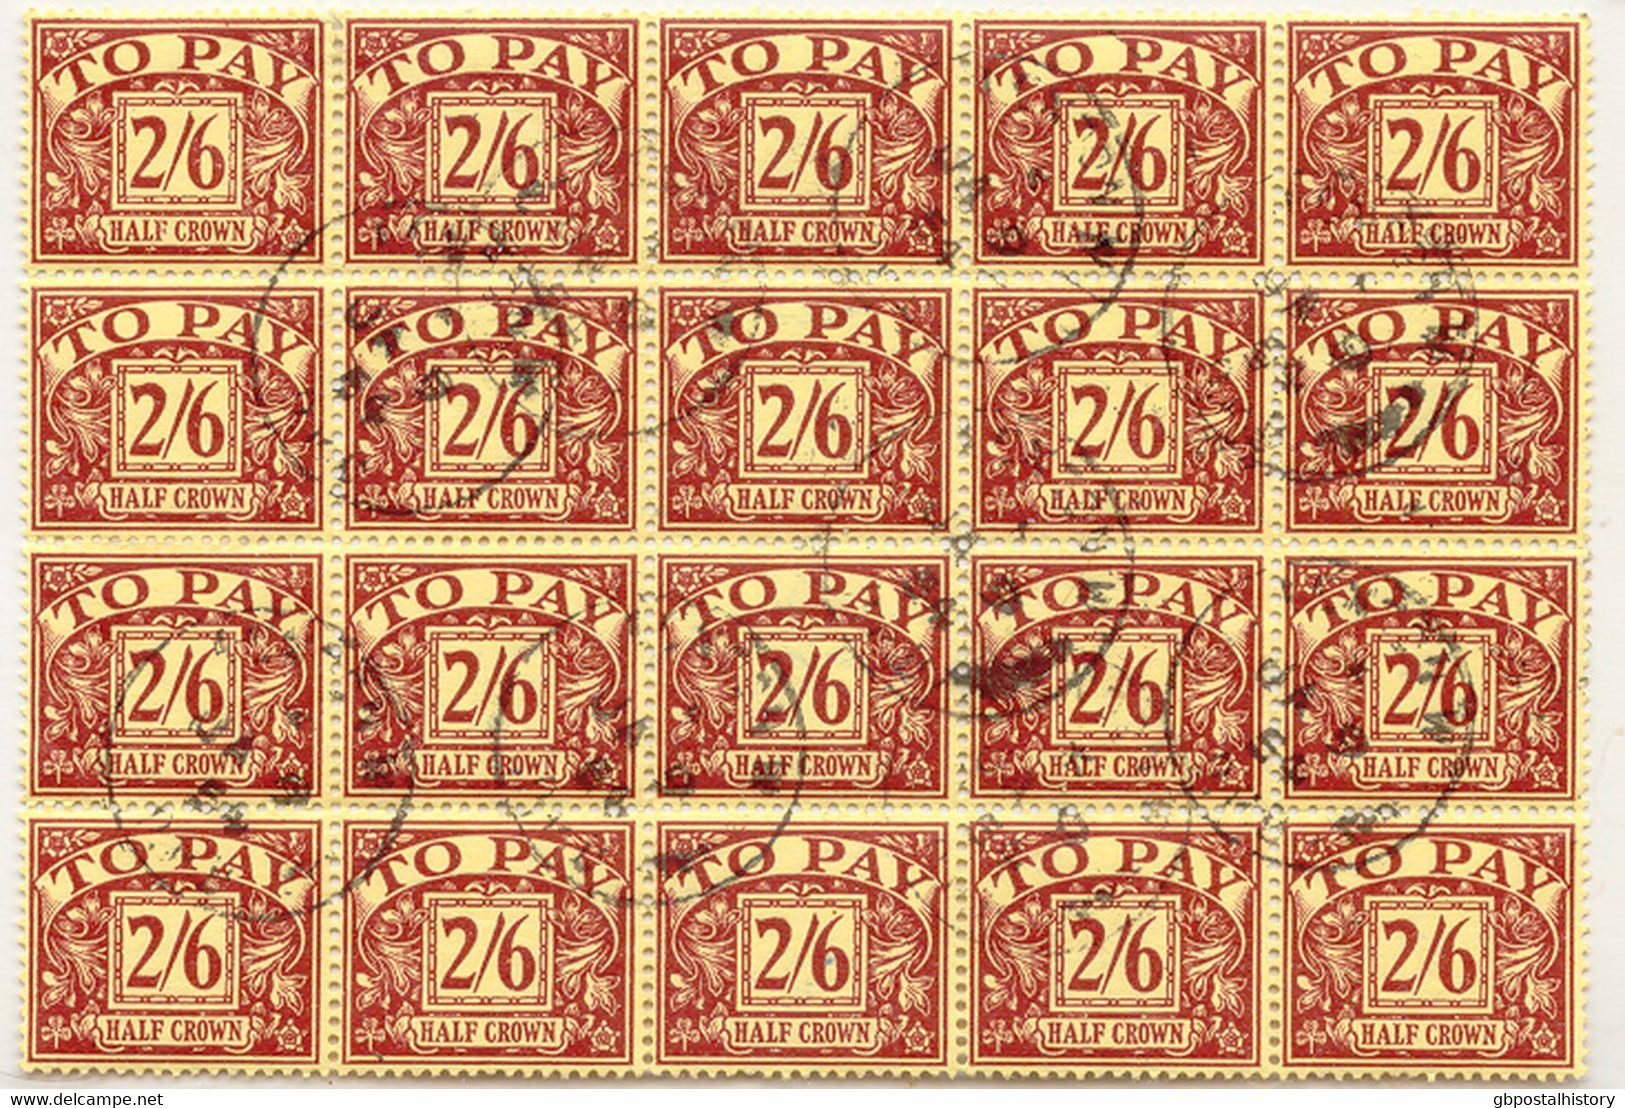 GB POSTAGE DUE 1938, Postage Due 2 Sh. 6 P Brown On Yellow, Extremely Rare Large Used Unit Of 20 Items, One Stamp With - Postage Due